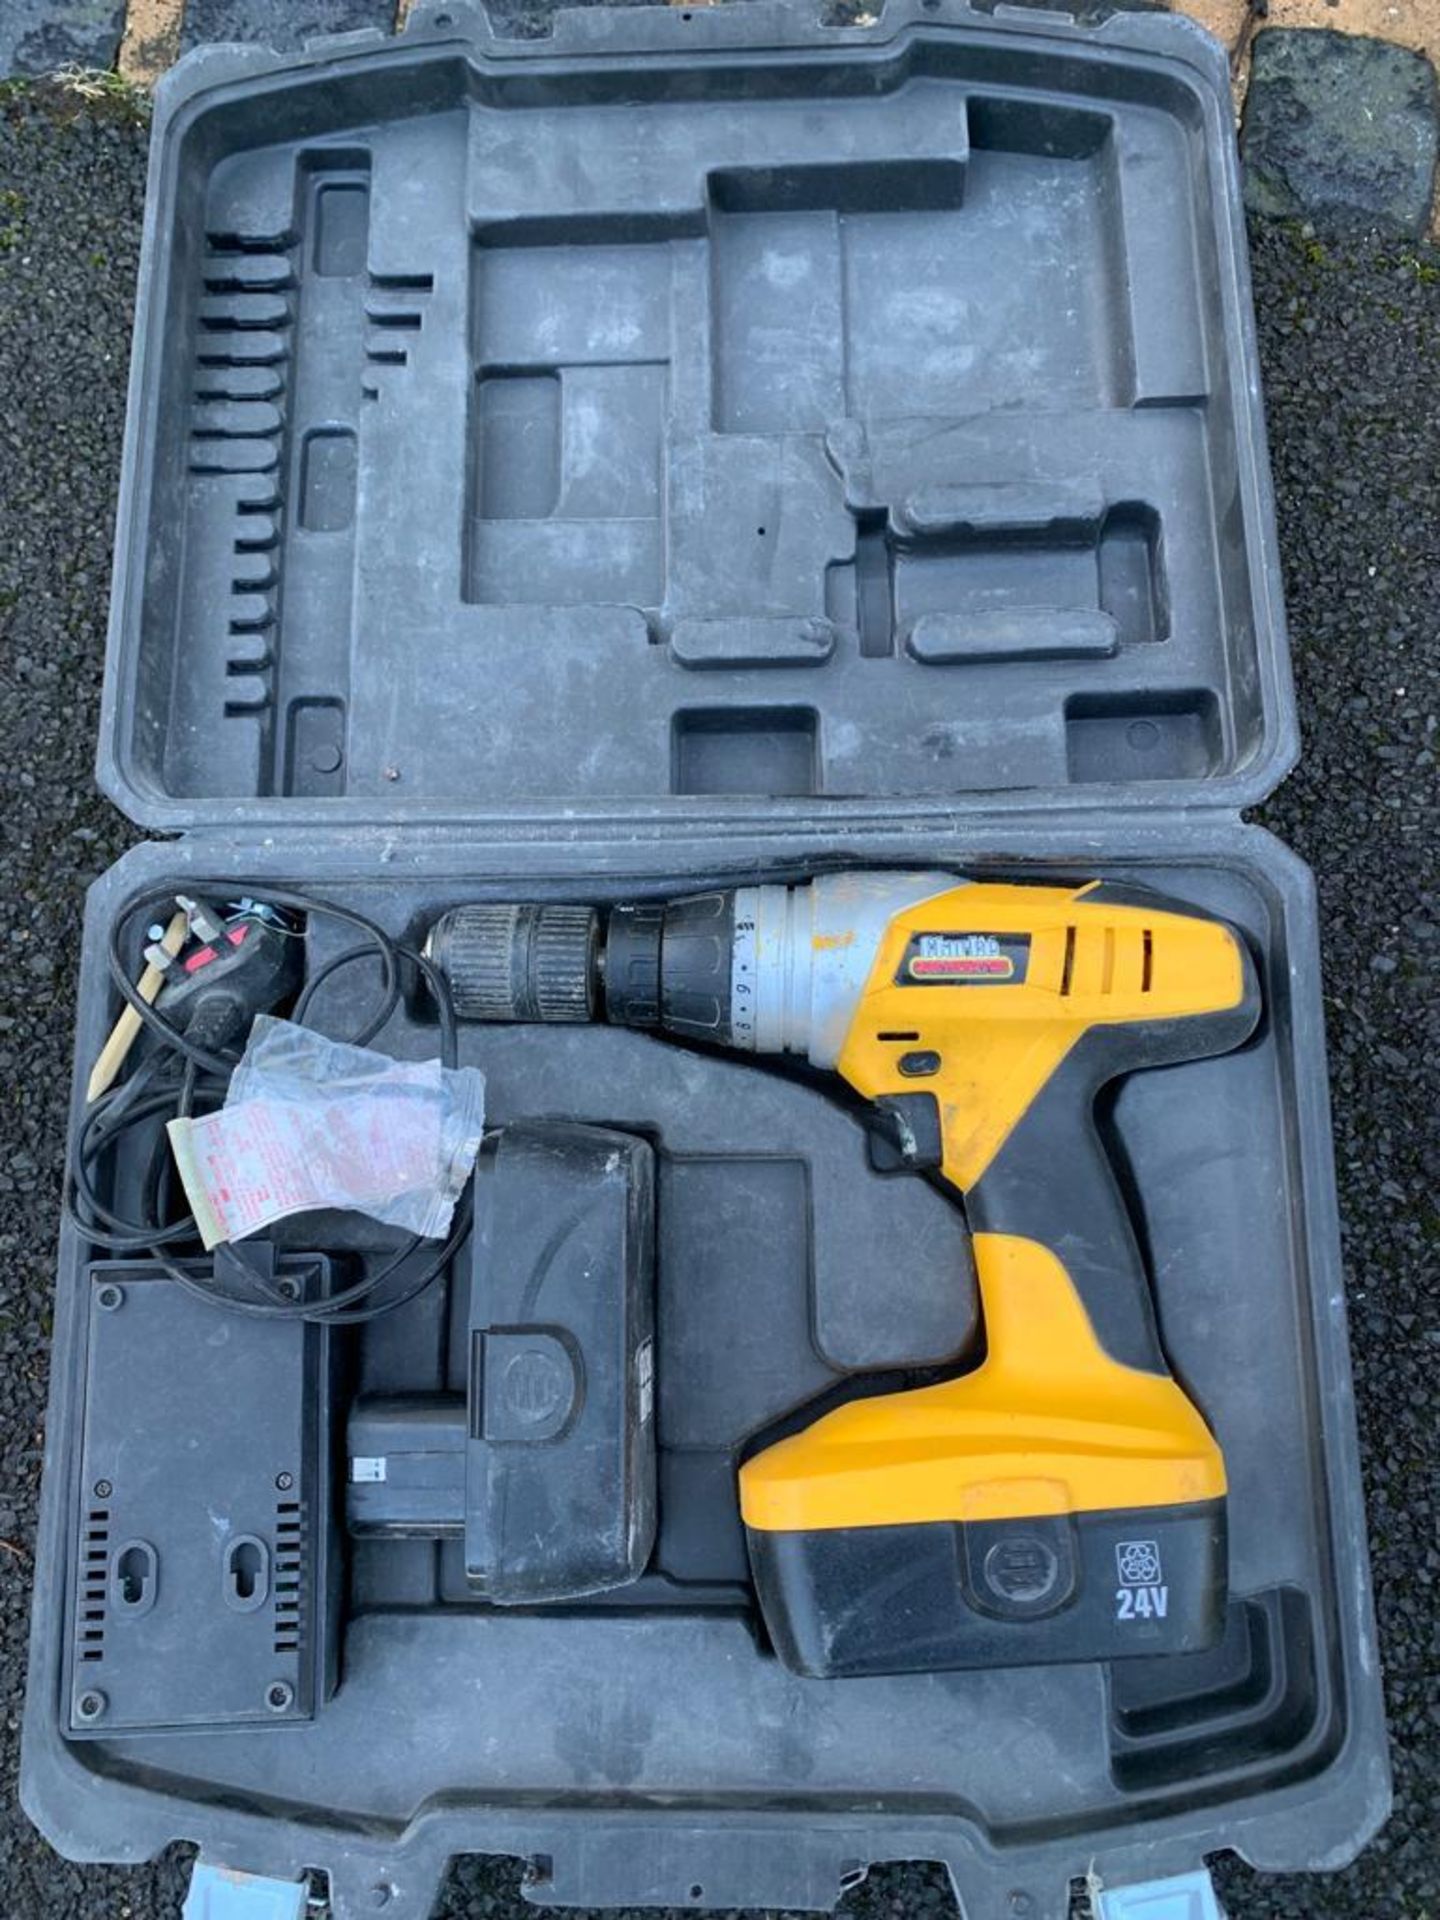 Clarke Cordless Impact Drill, Charger, Spare Battery and Carry Case.